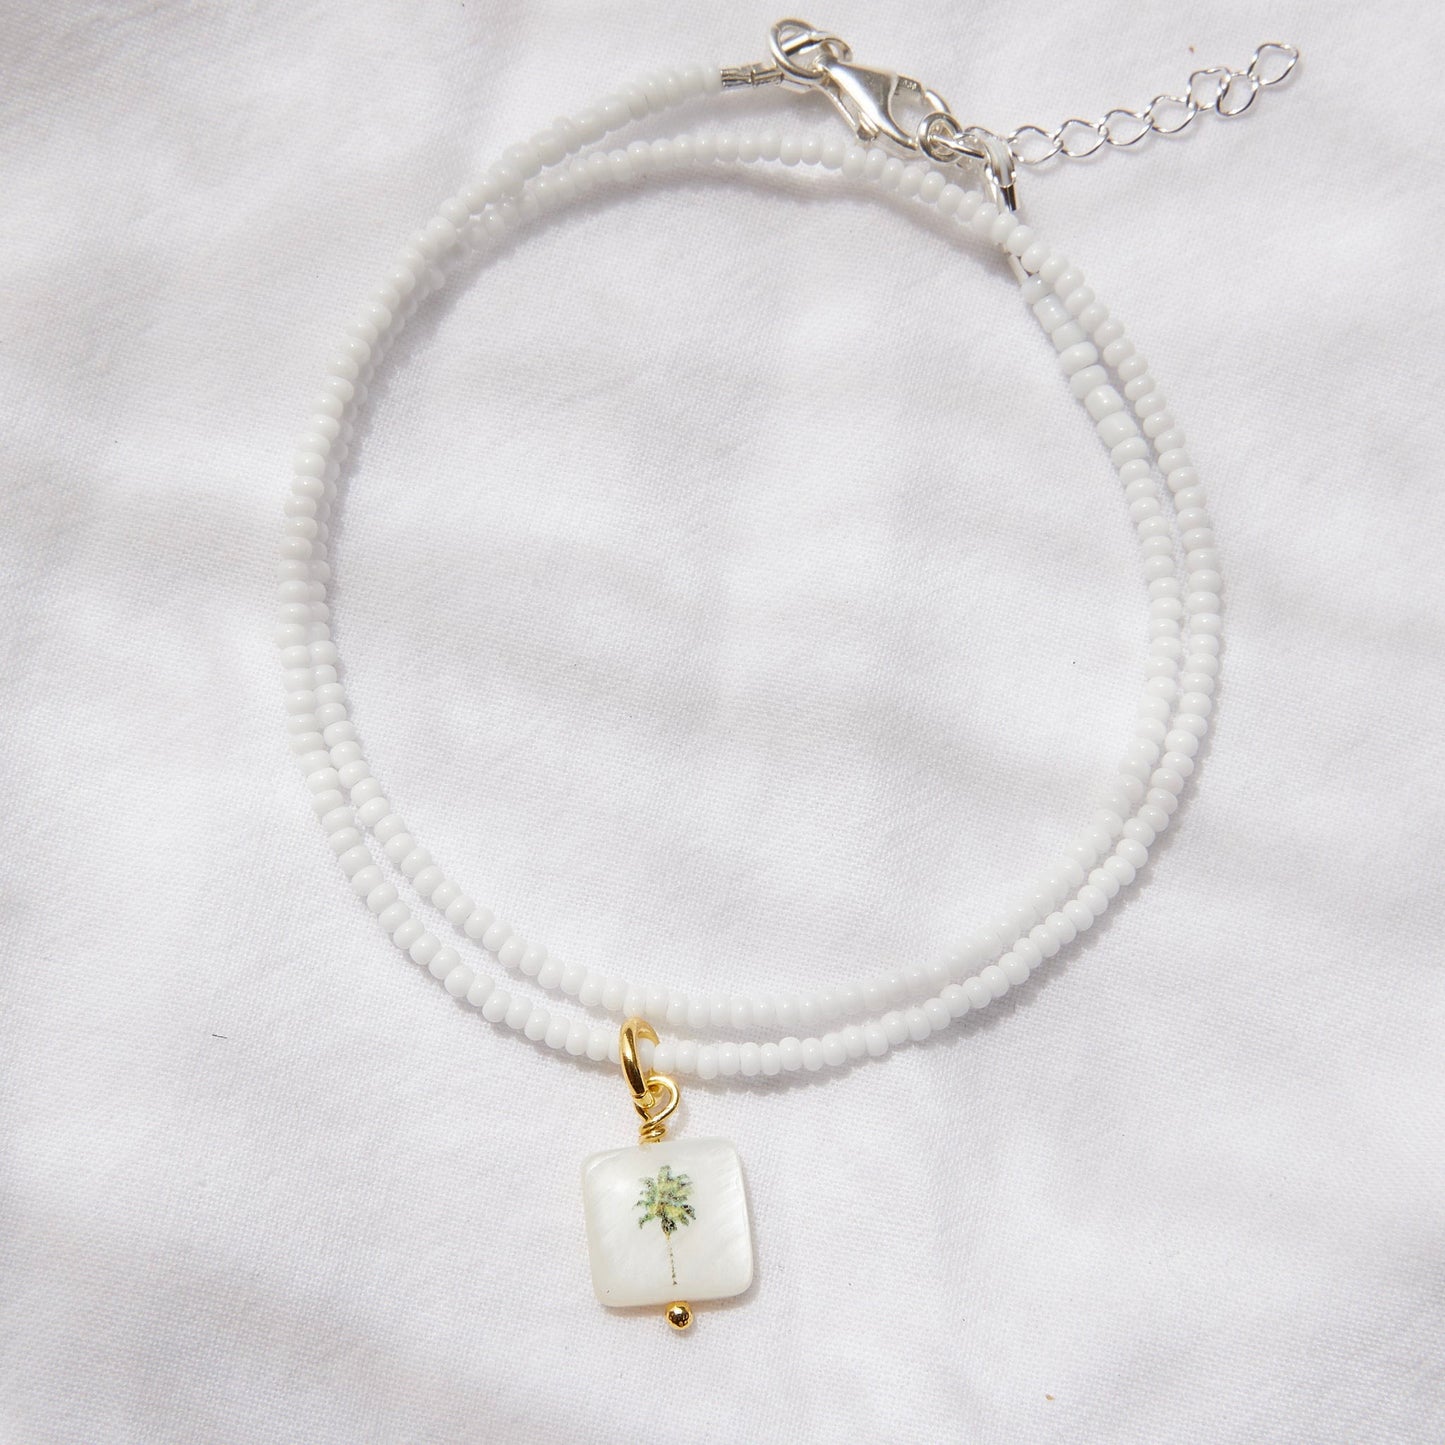 Square palm tree on white glass beads